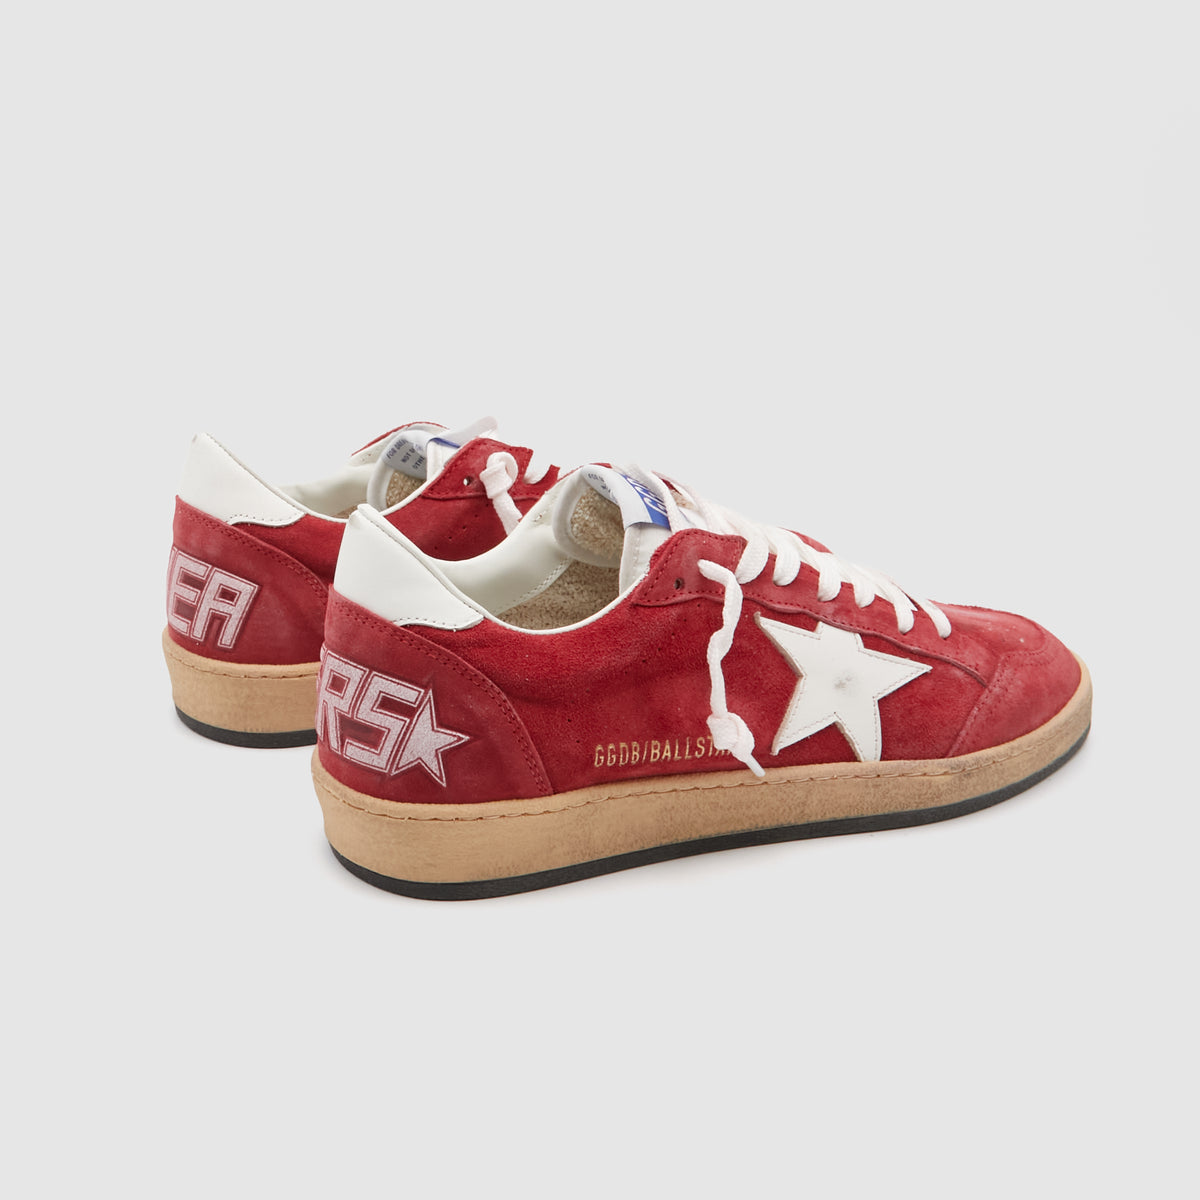 Golden Goose Ball Star Red White Sneakers